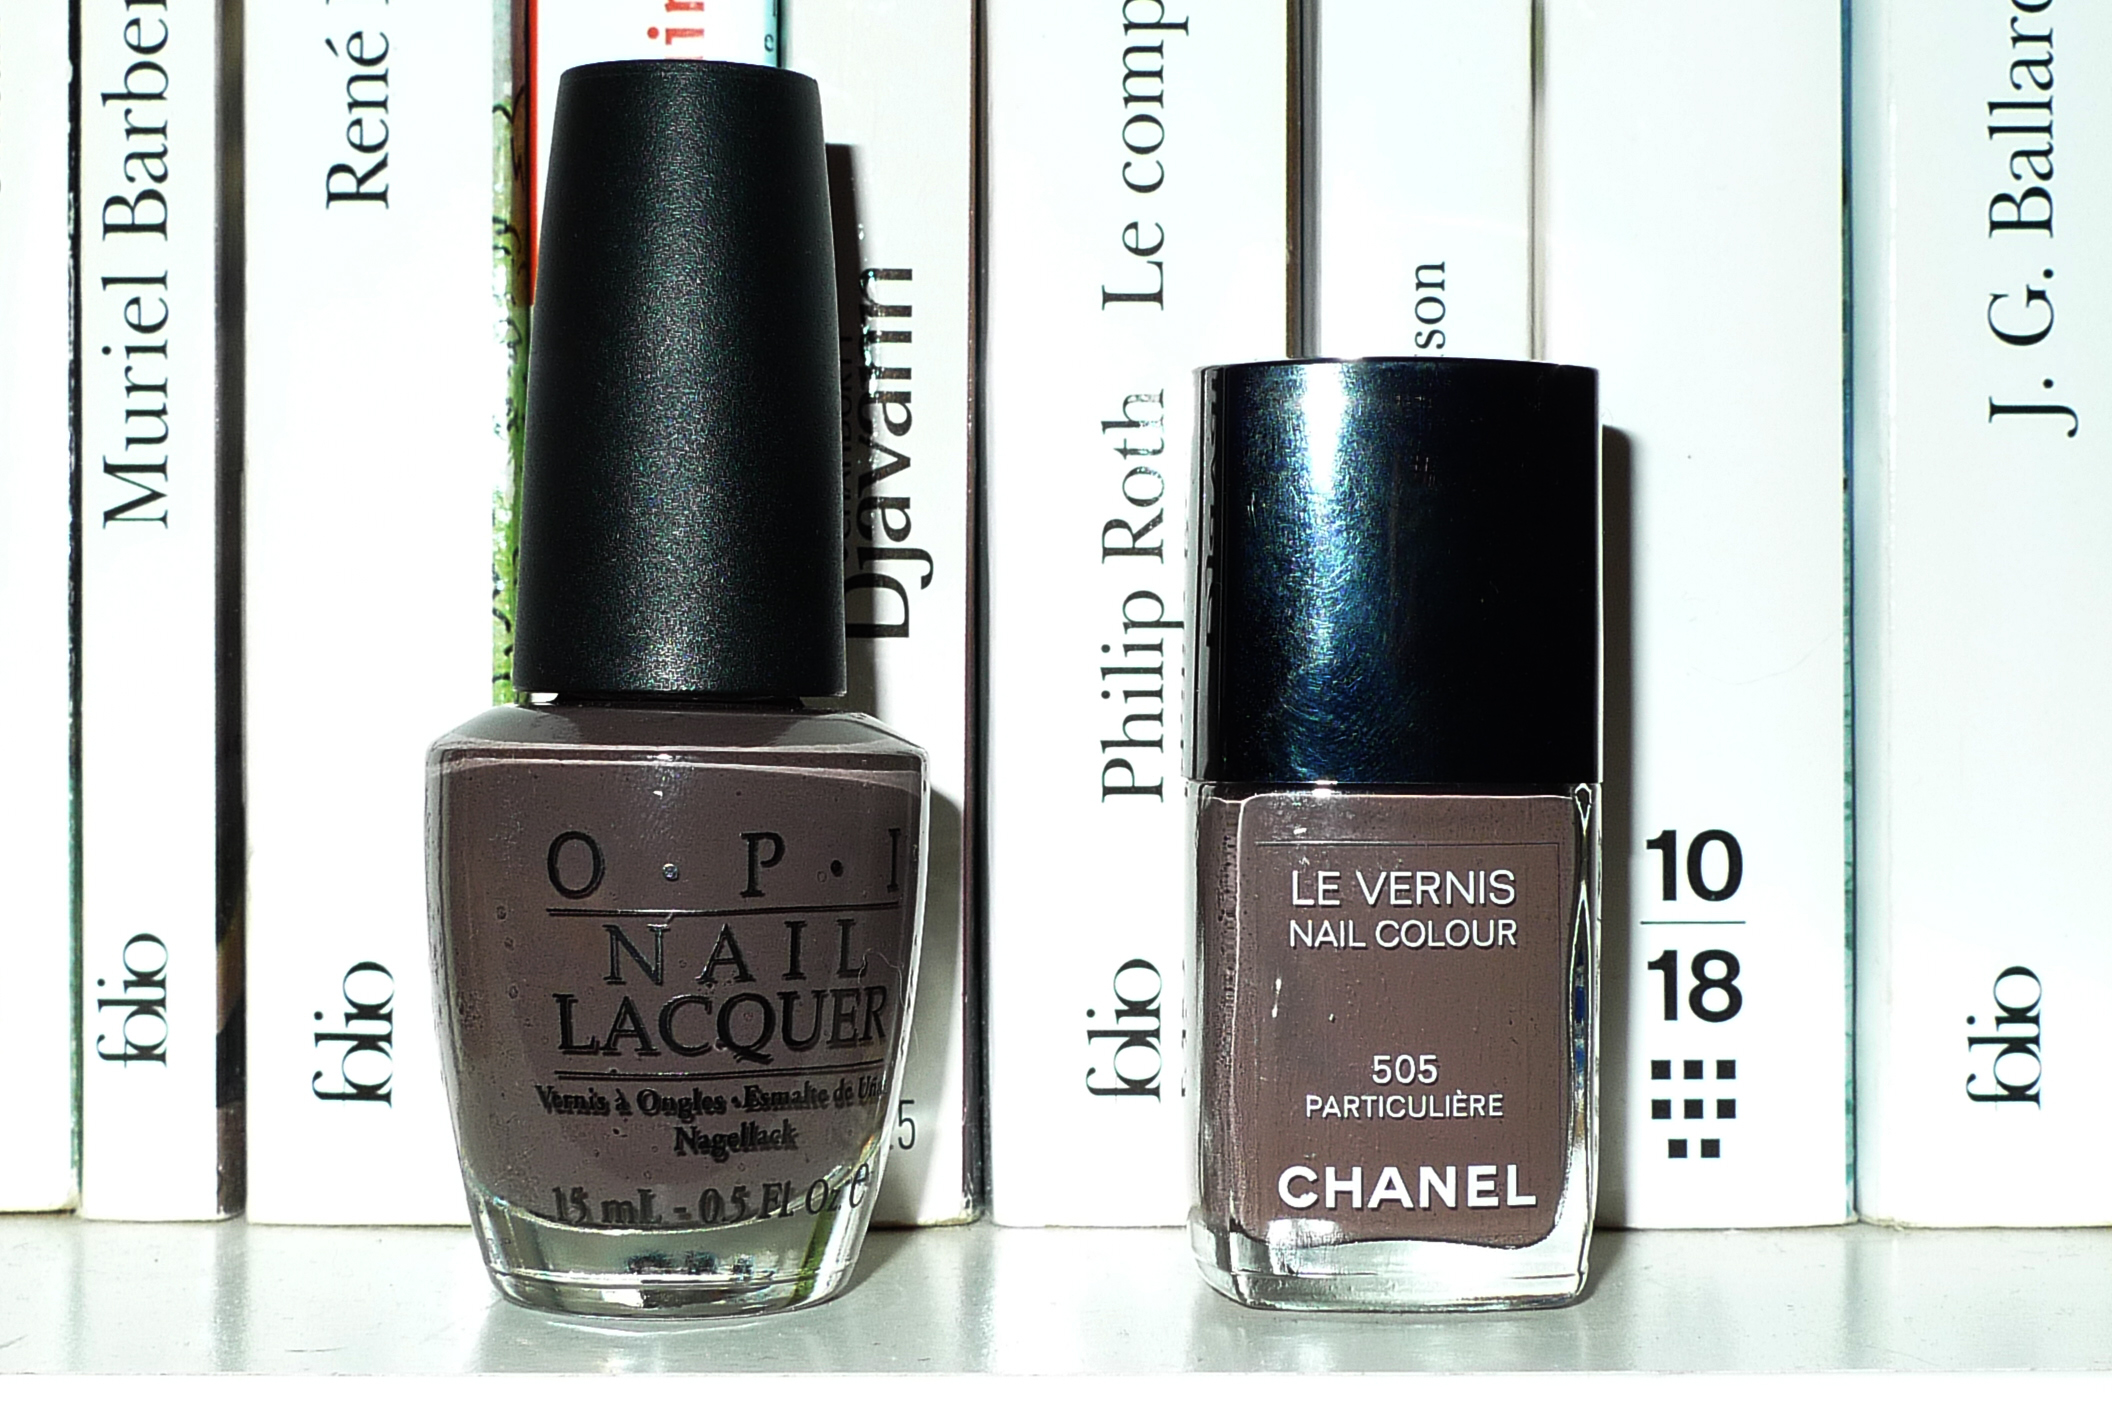 505 Chanel vs You don't know Jacques, OPI – Deedee